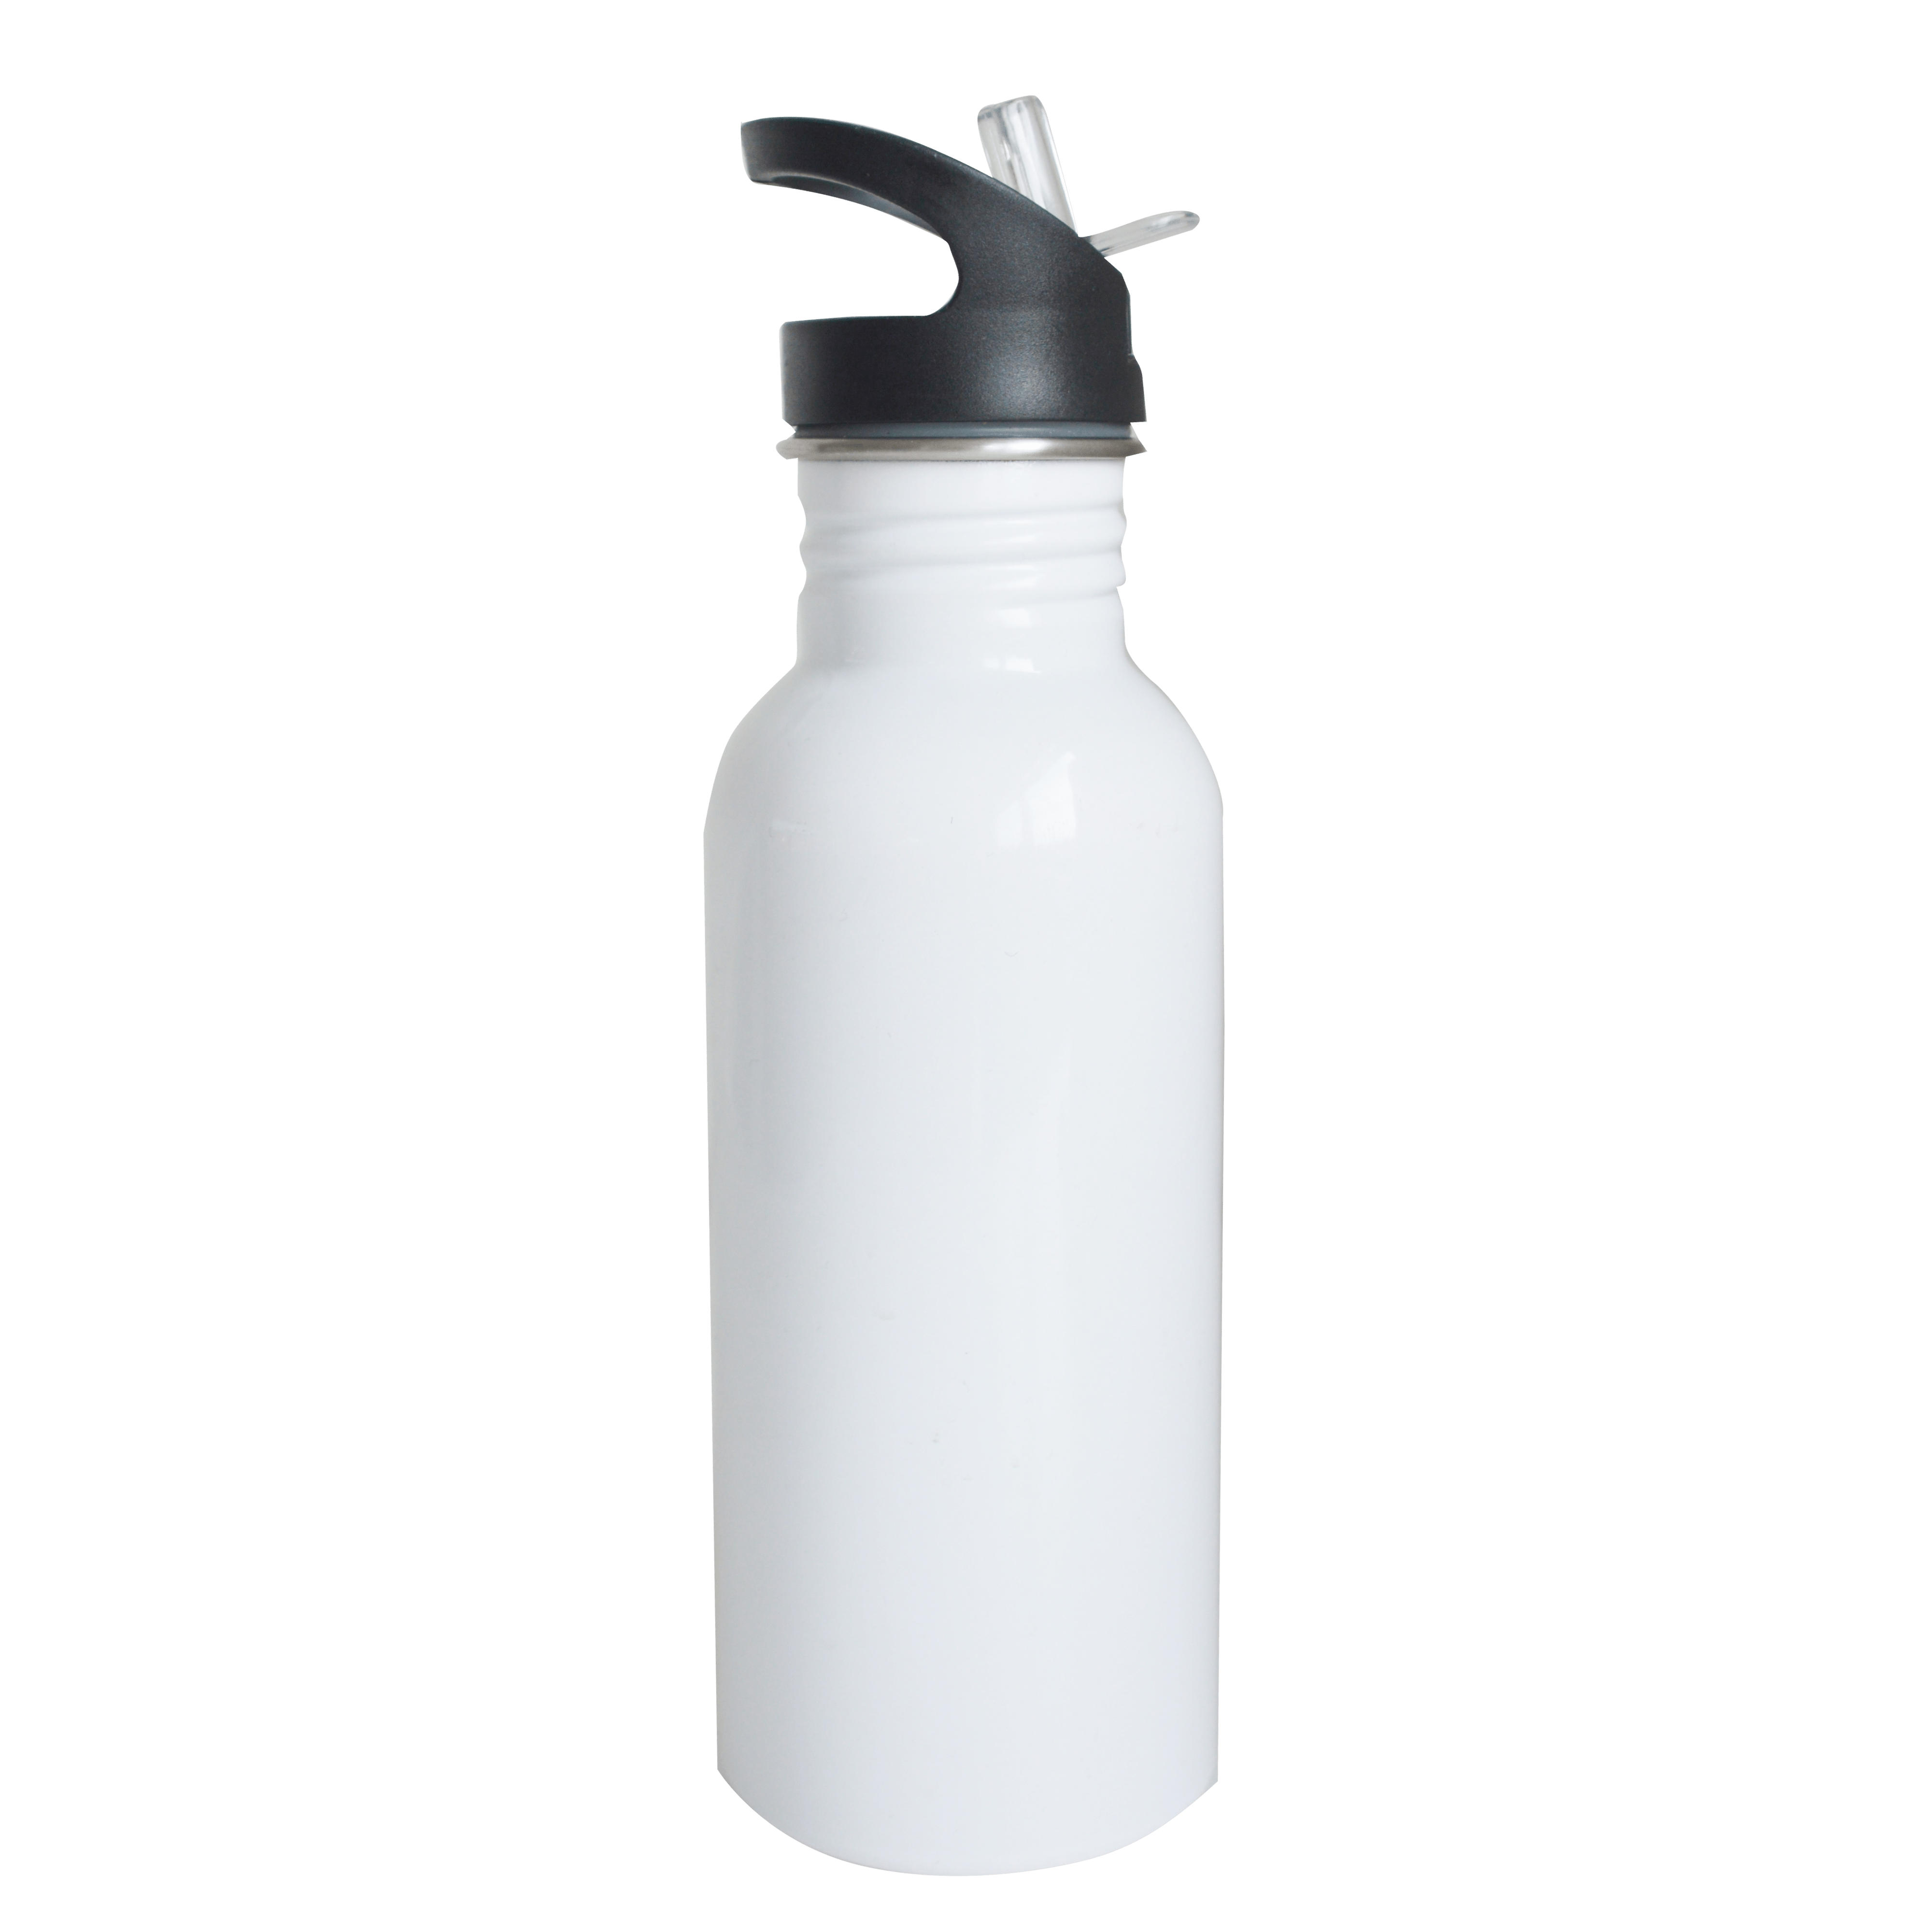 Sports drinking bottle with drinking straw